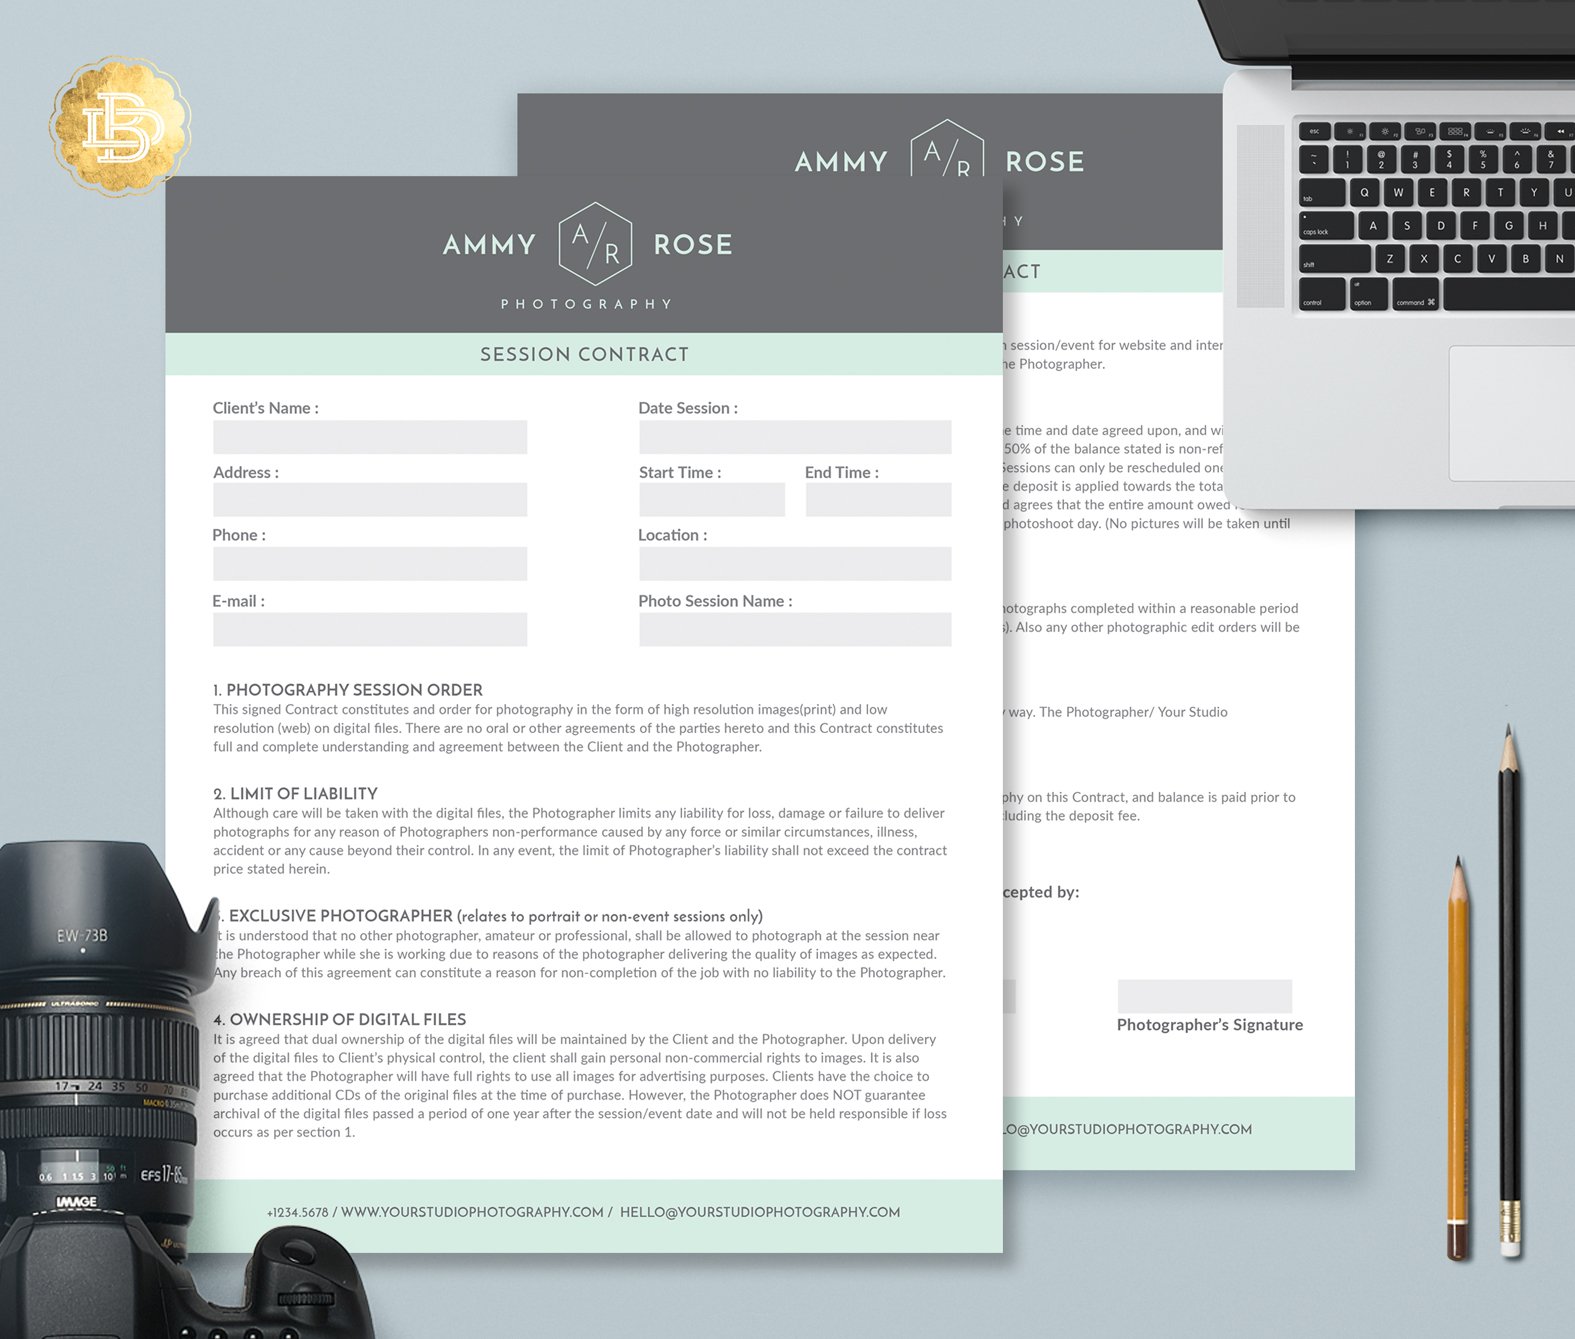 Session Contract Form Template SC002 cover image.